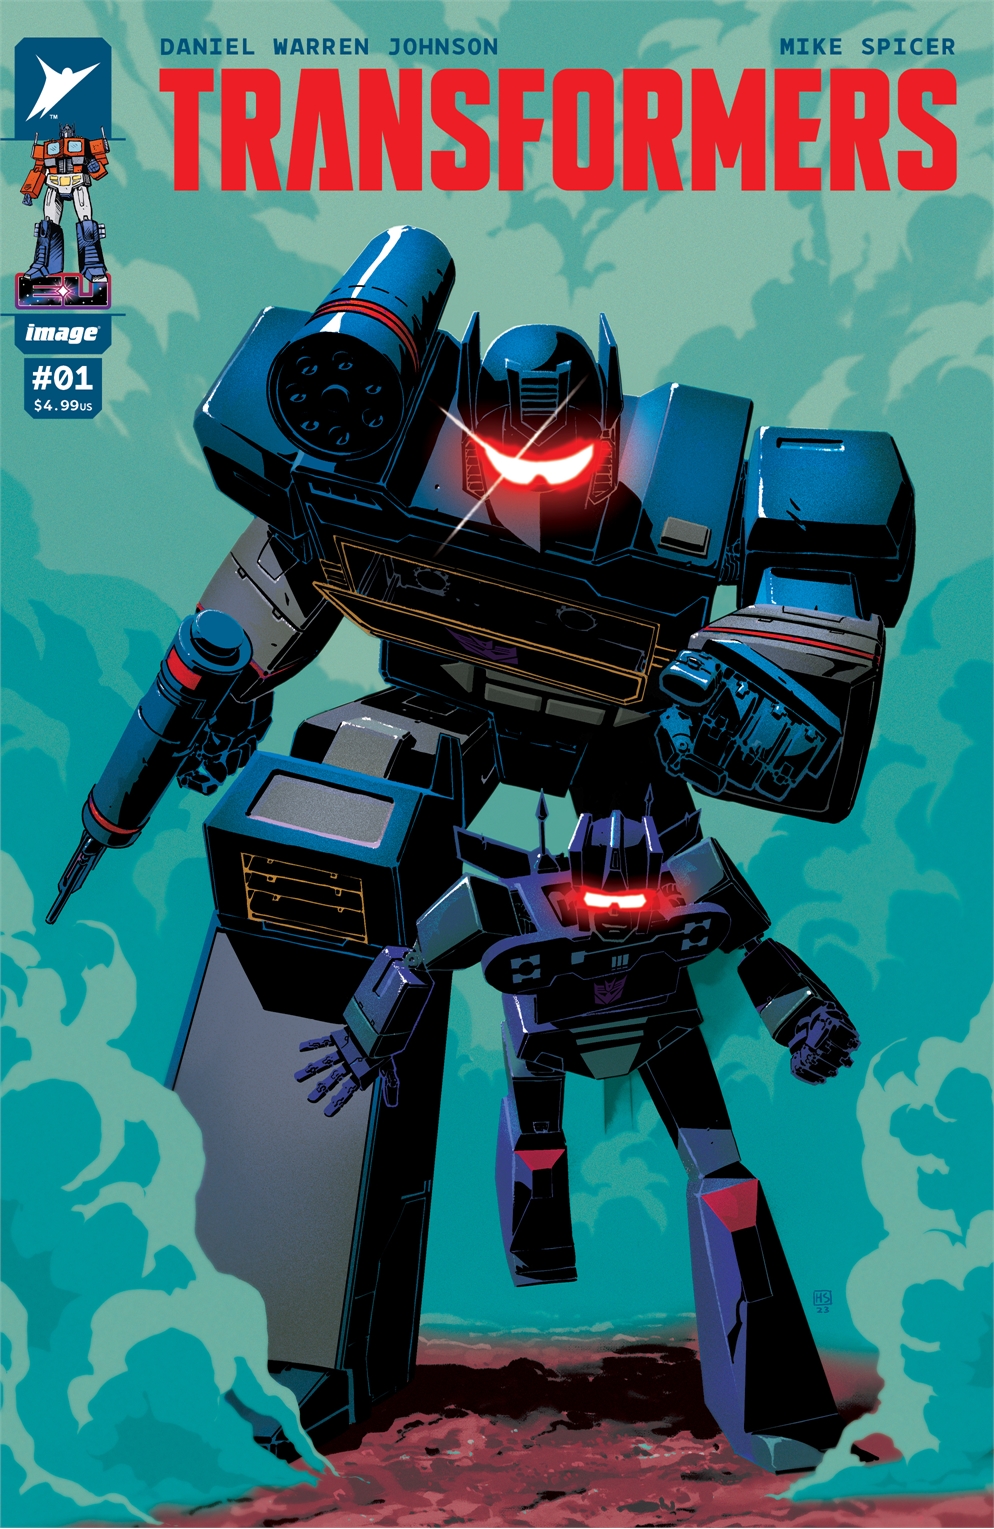 Transformers #1 Memory Lane Comics Exclusive Cover By Hayden Sherman